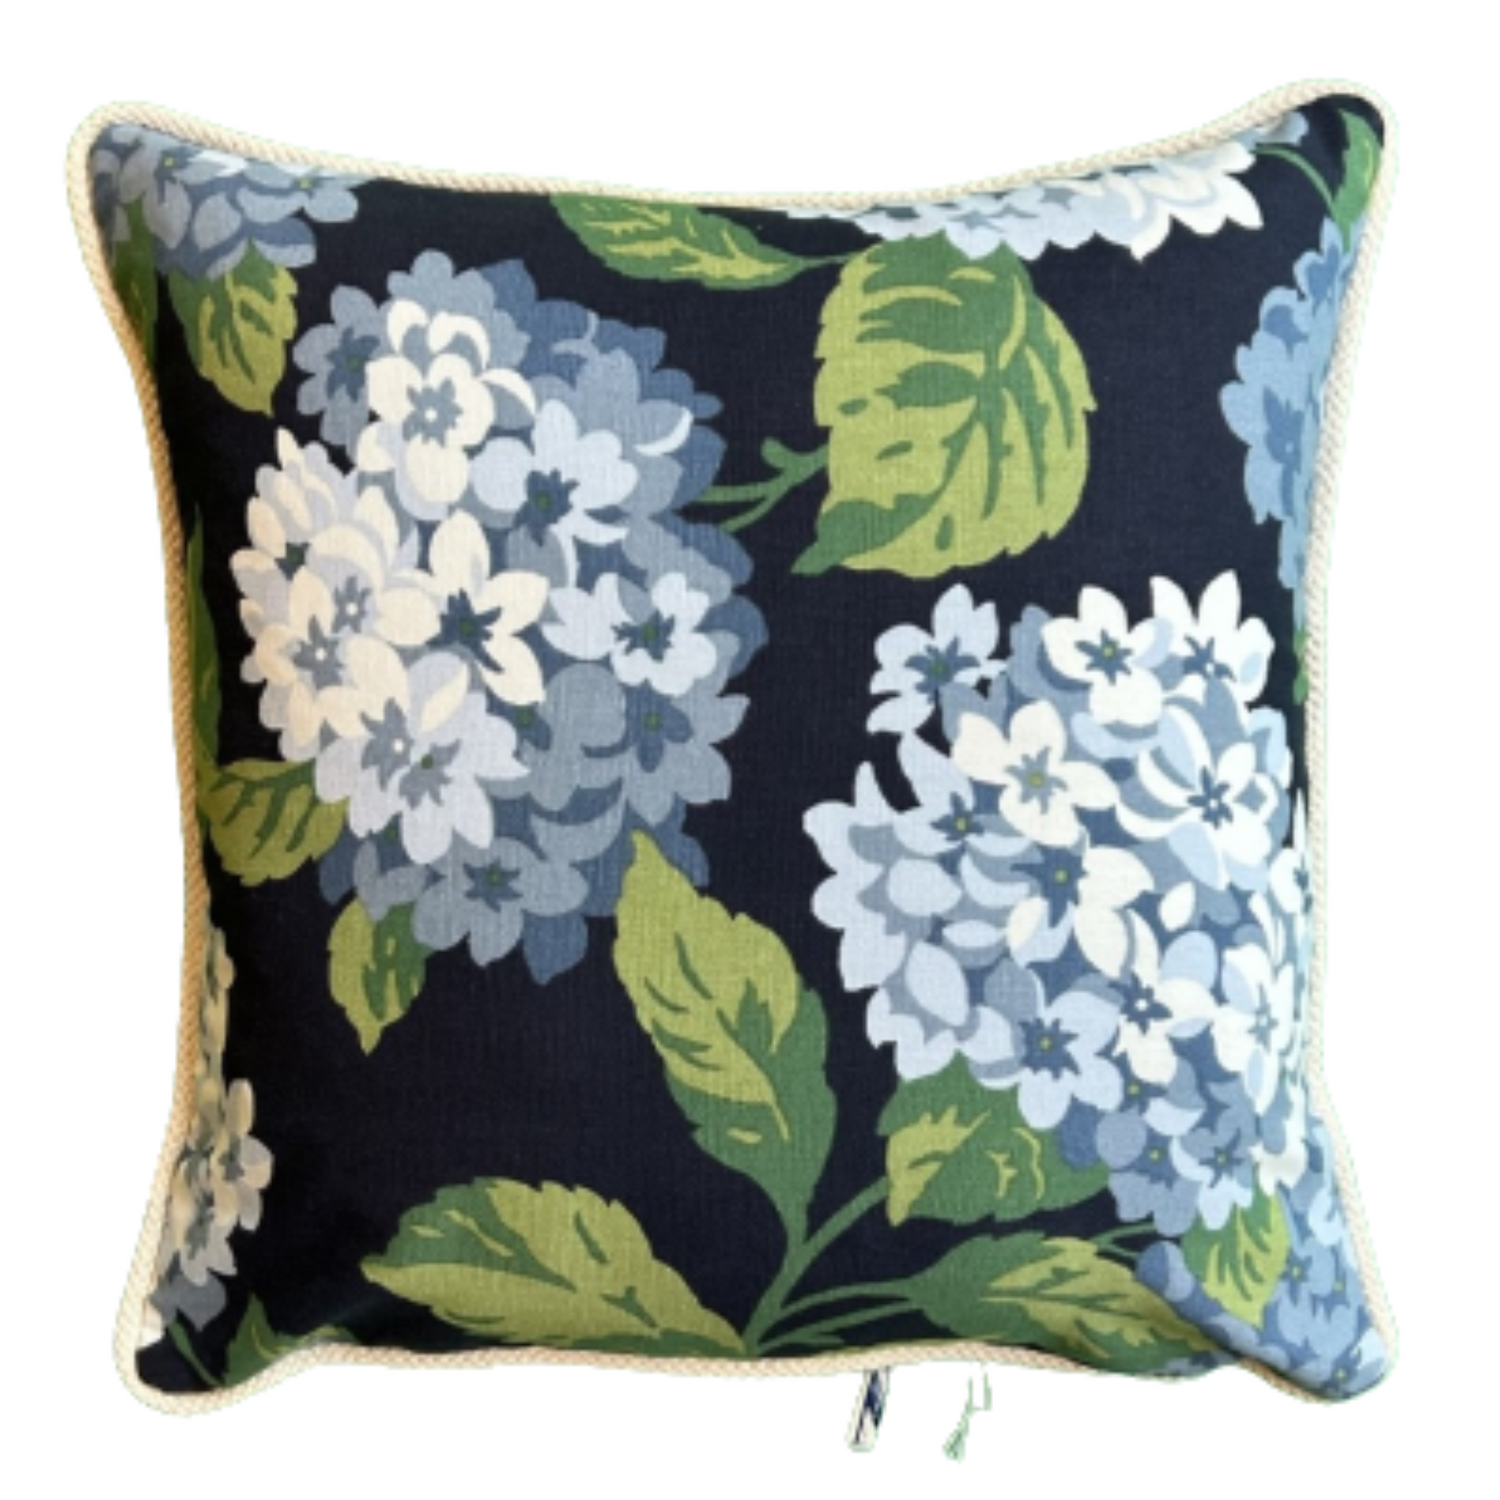  Summer Wind Midnight Hydrangea and Toile 16 X 16 Square Designer Pillow Sides with Down Feather Insert